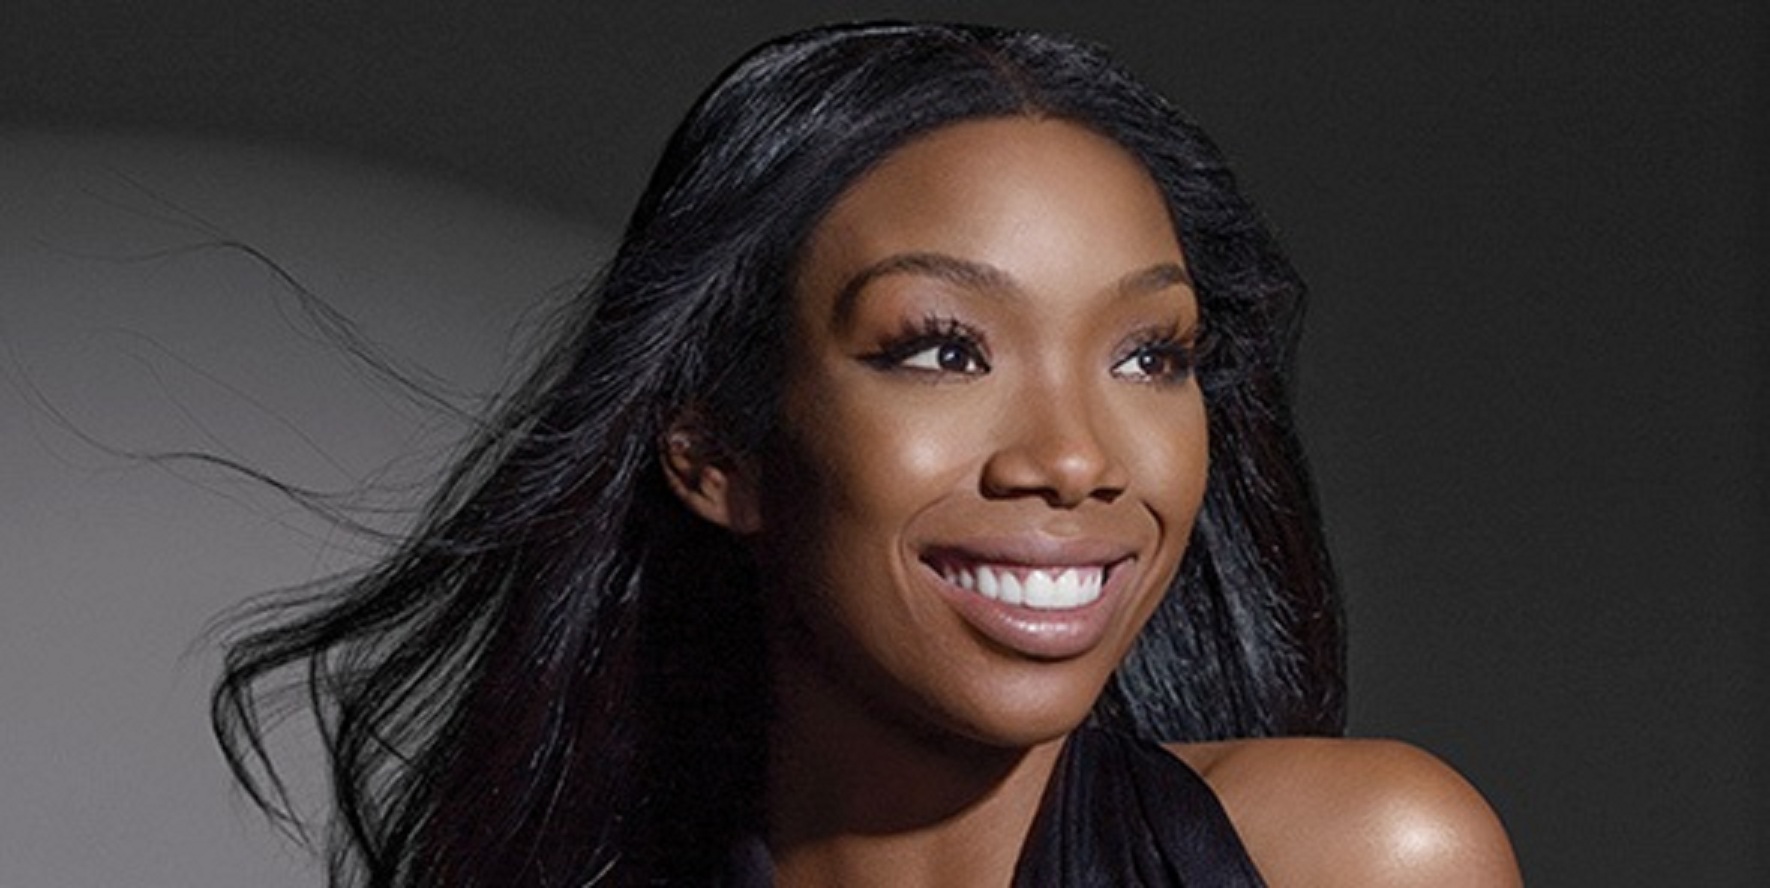 Listen To The First Preview Of Brandy’s Brand New Song From Upcoming Album!